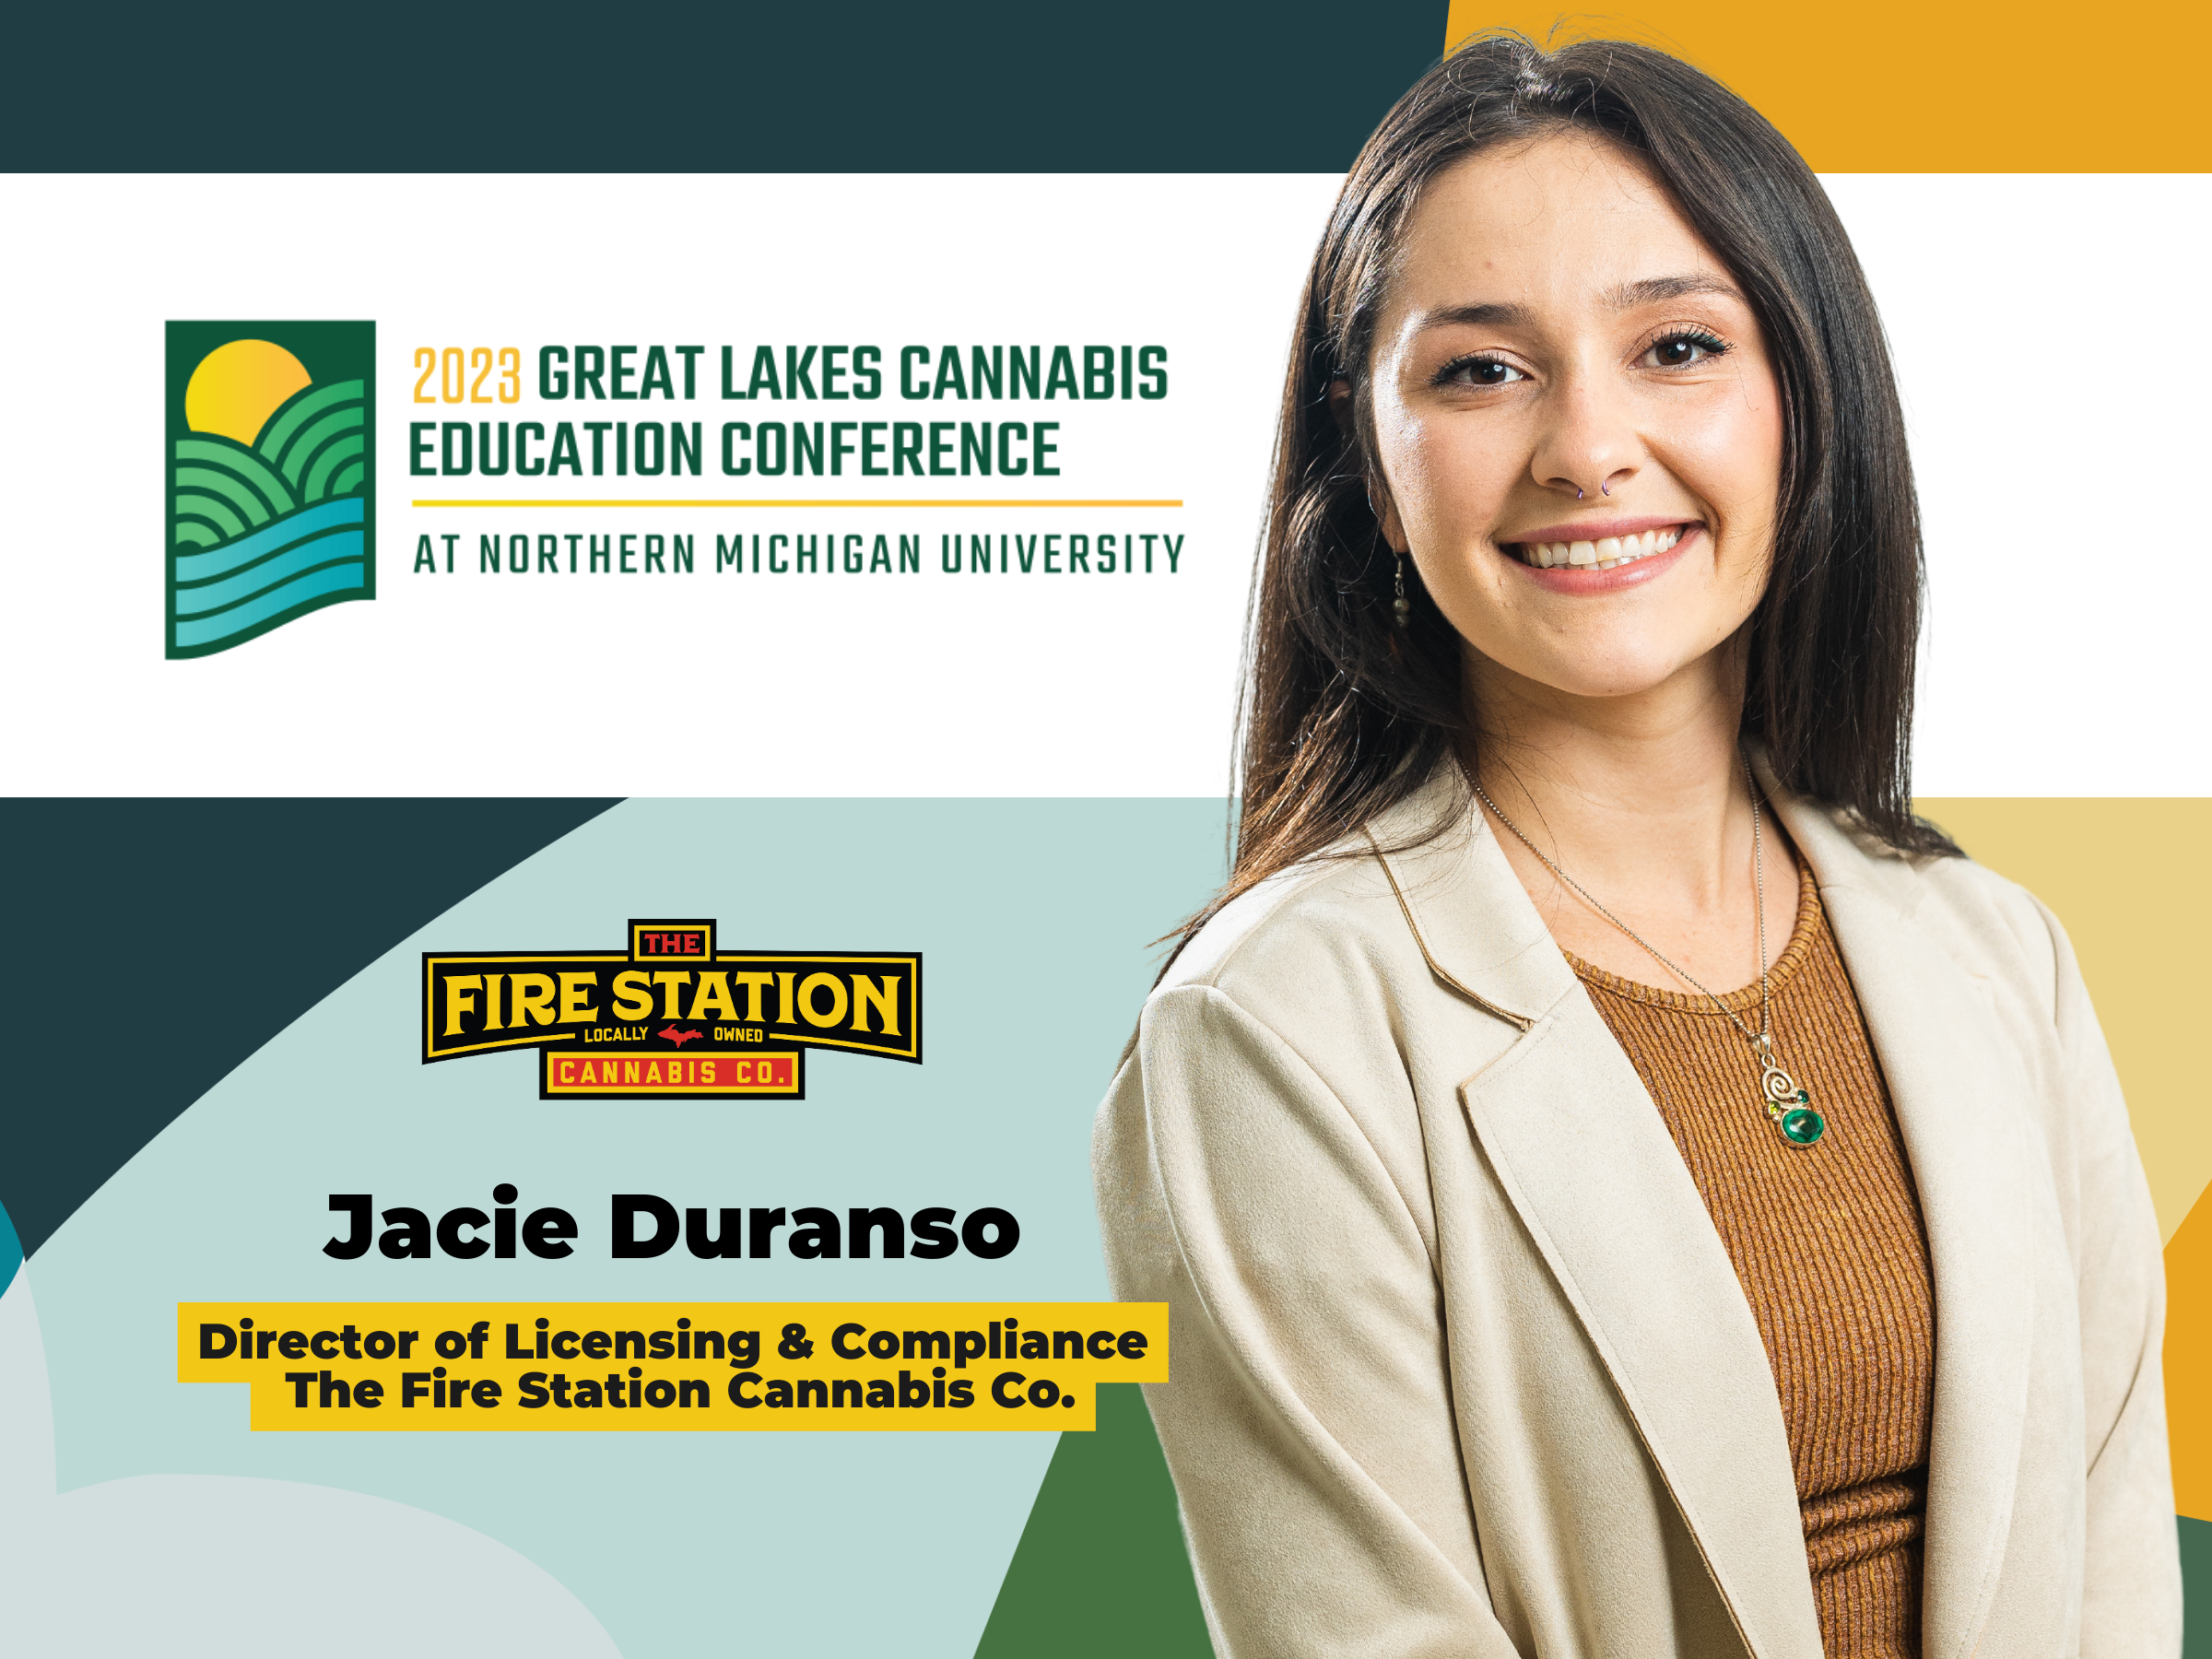 Jacie Duranso to speak at the 2023 Great Lakes Cannabis Education Conference at Northern Michigan University